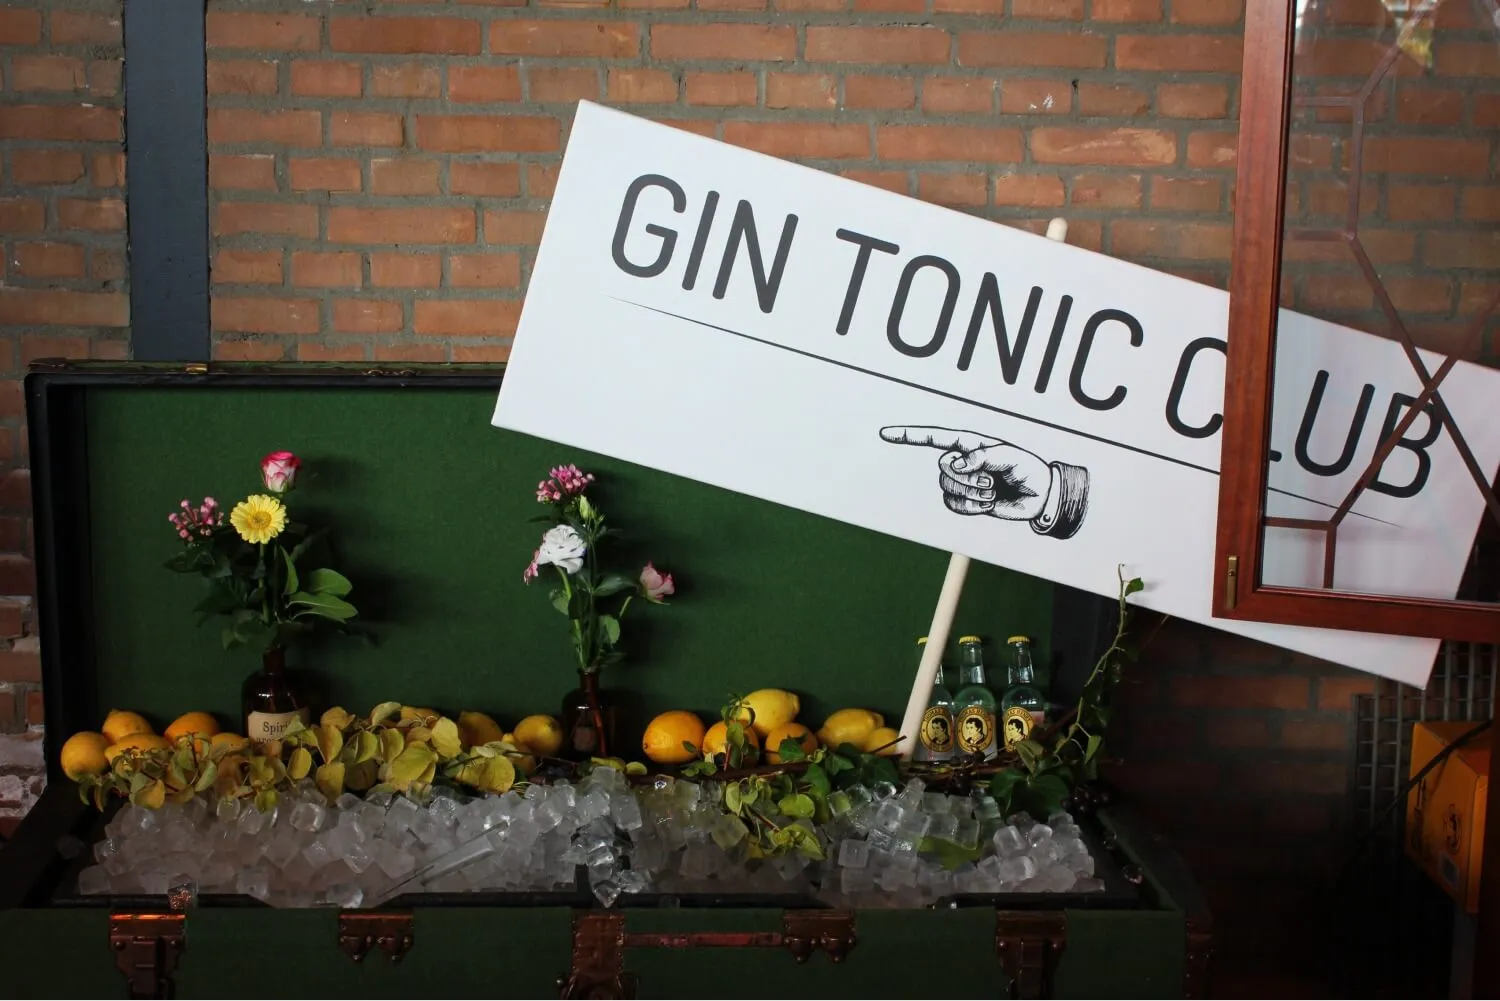 A sign that says Gin Tonic Club